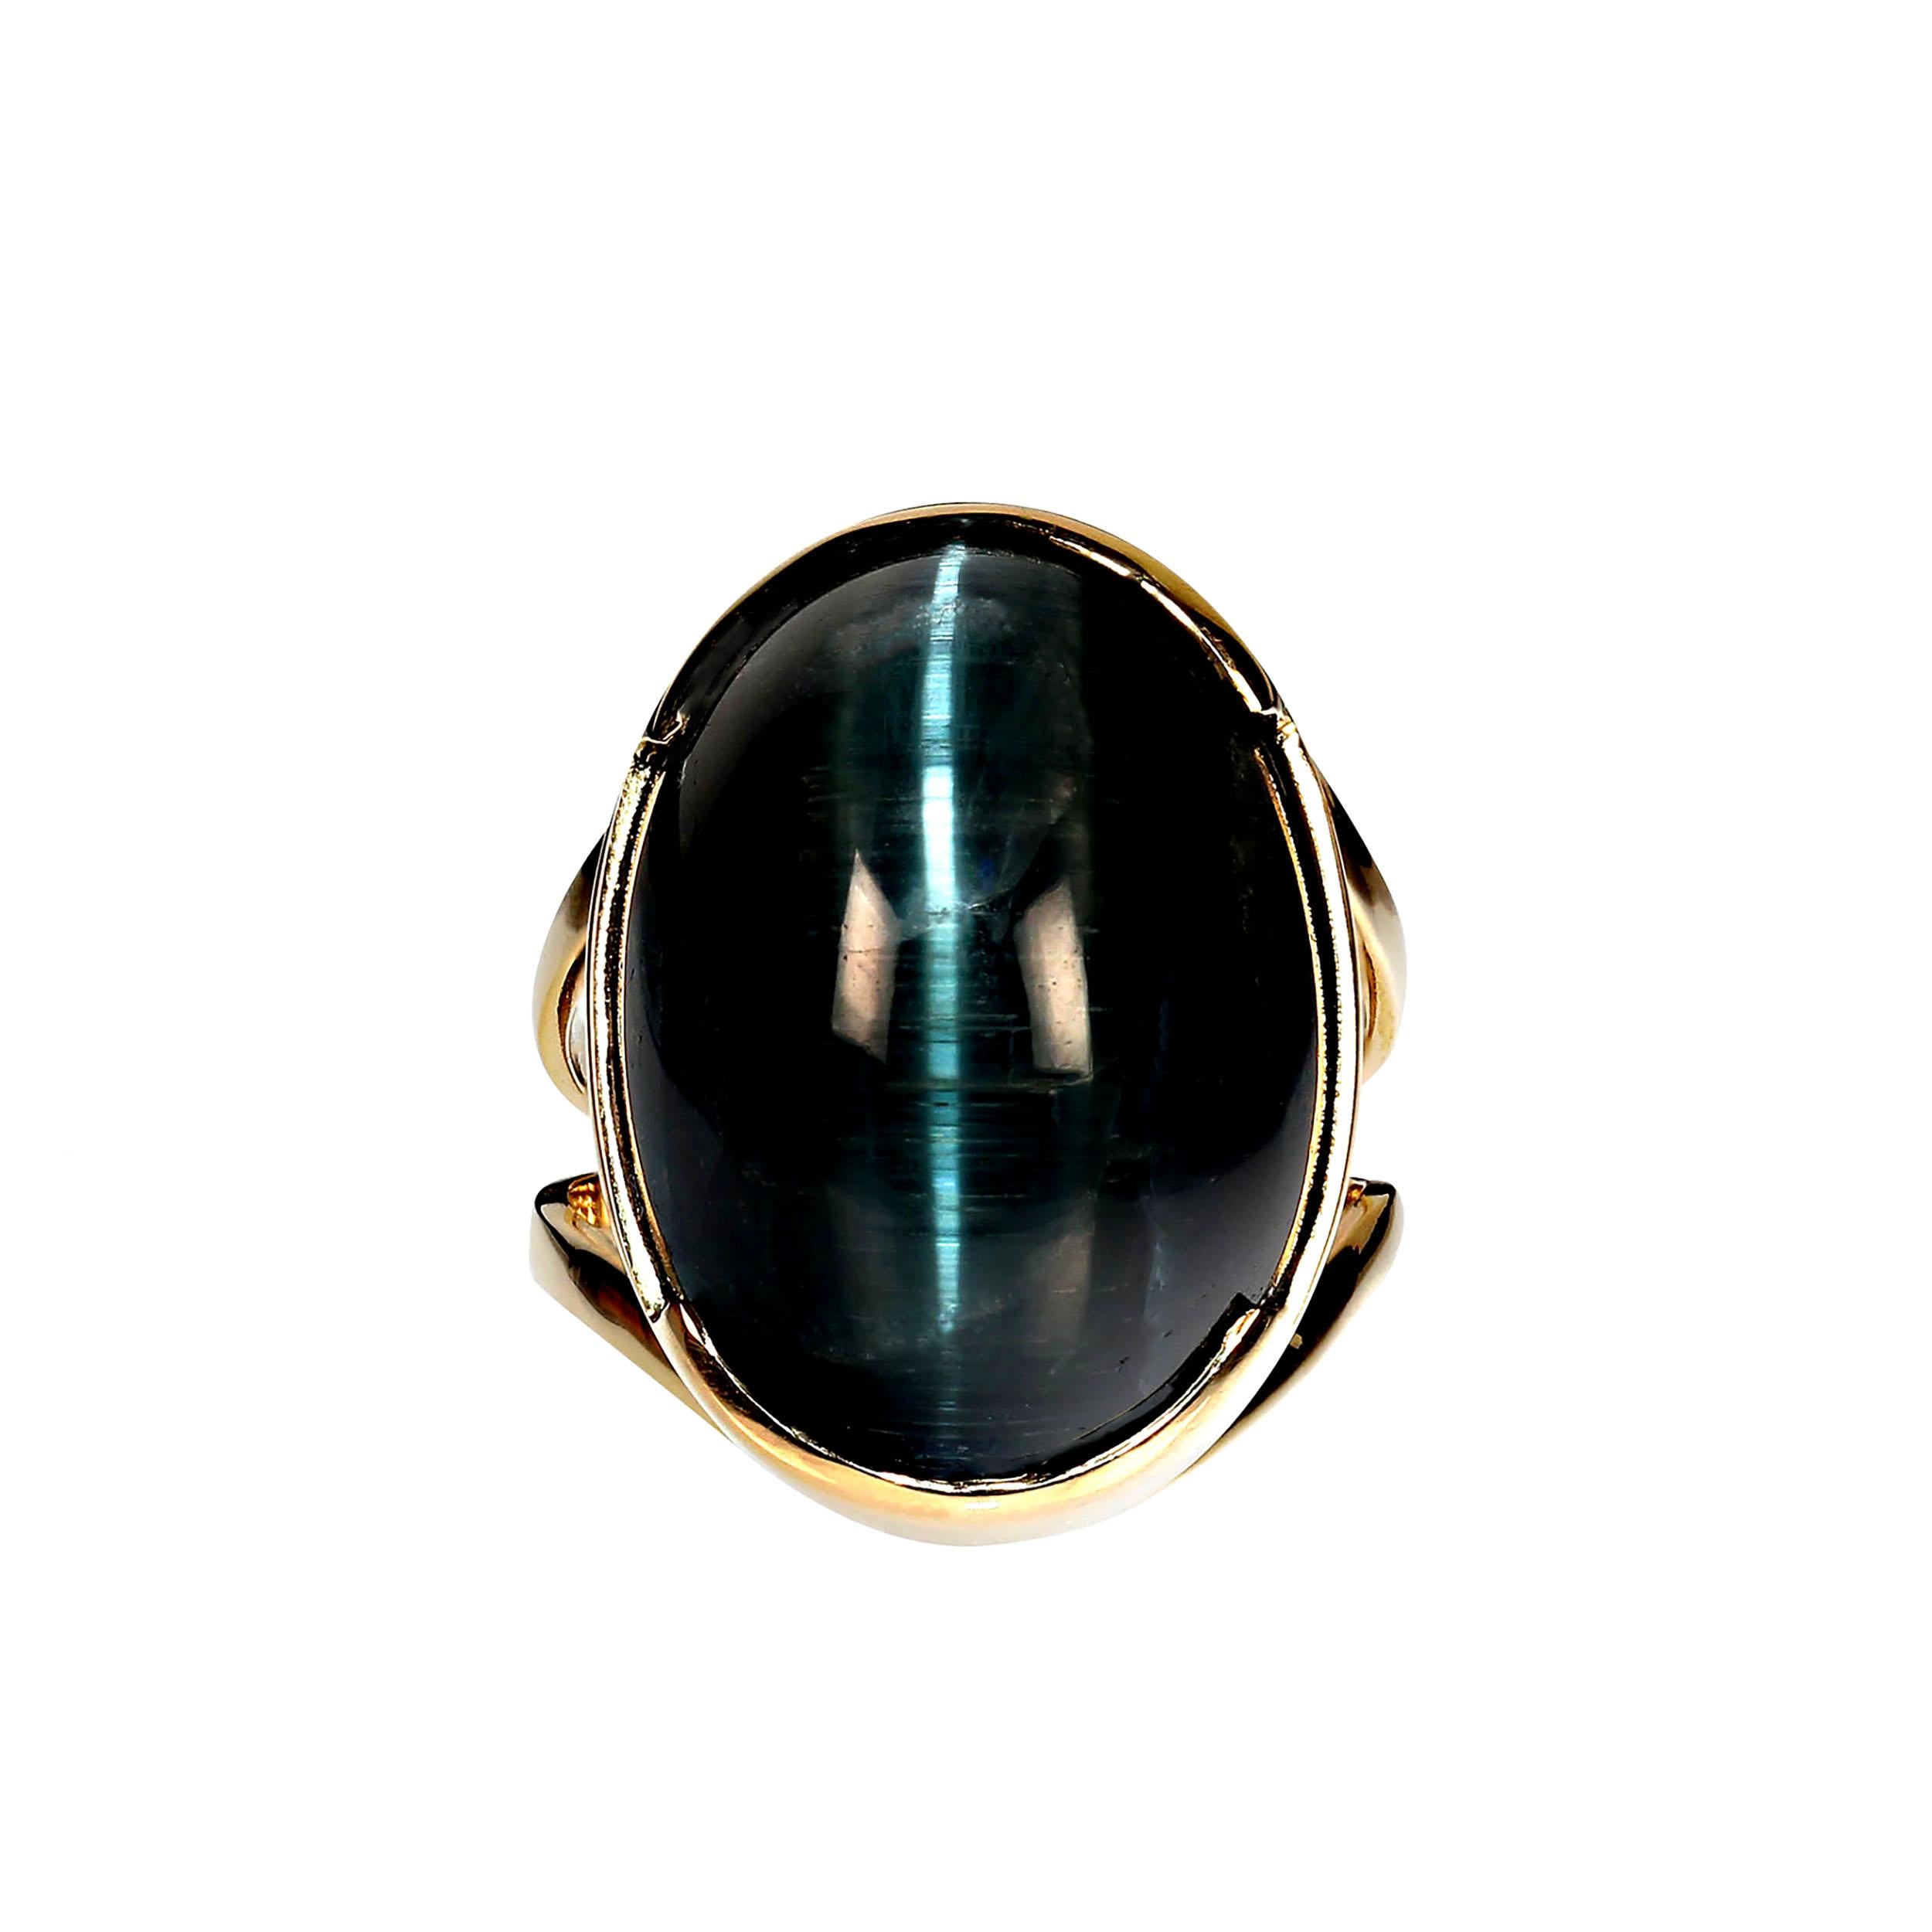 Artisan AJD Magnificent 24 Carat Blue-Green Cat's Eye Tourmaline in 18KT Gold Ring For Sale